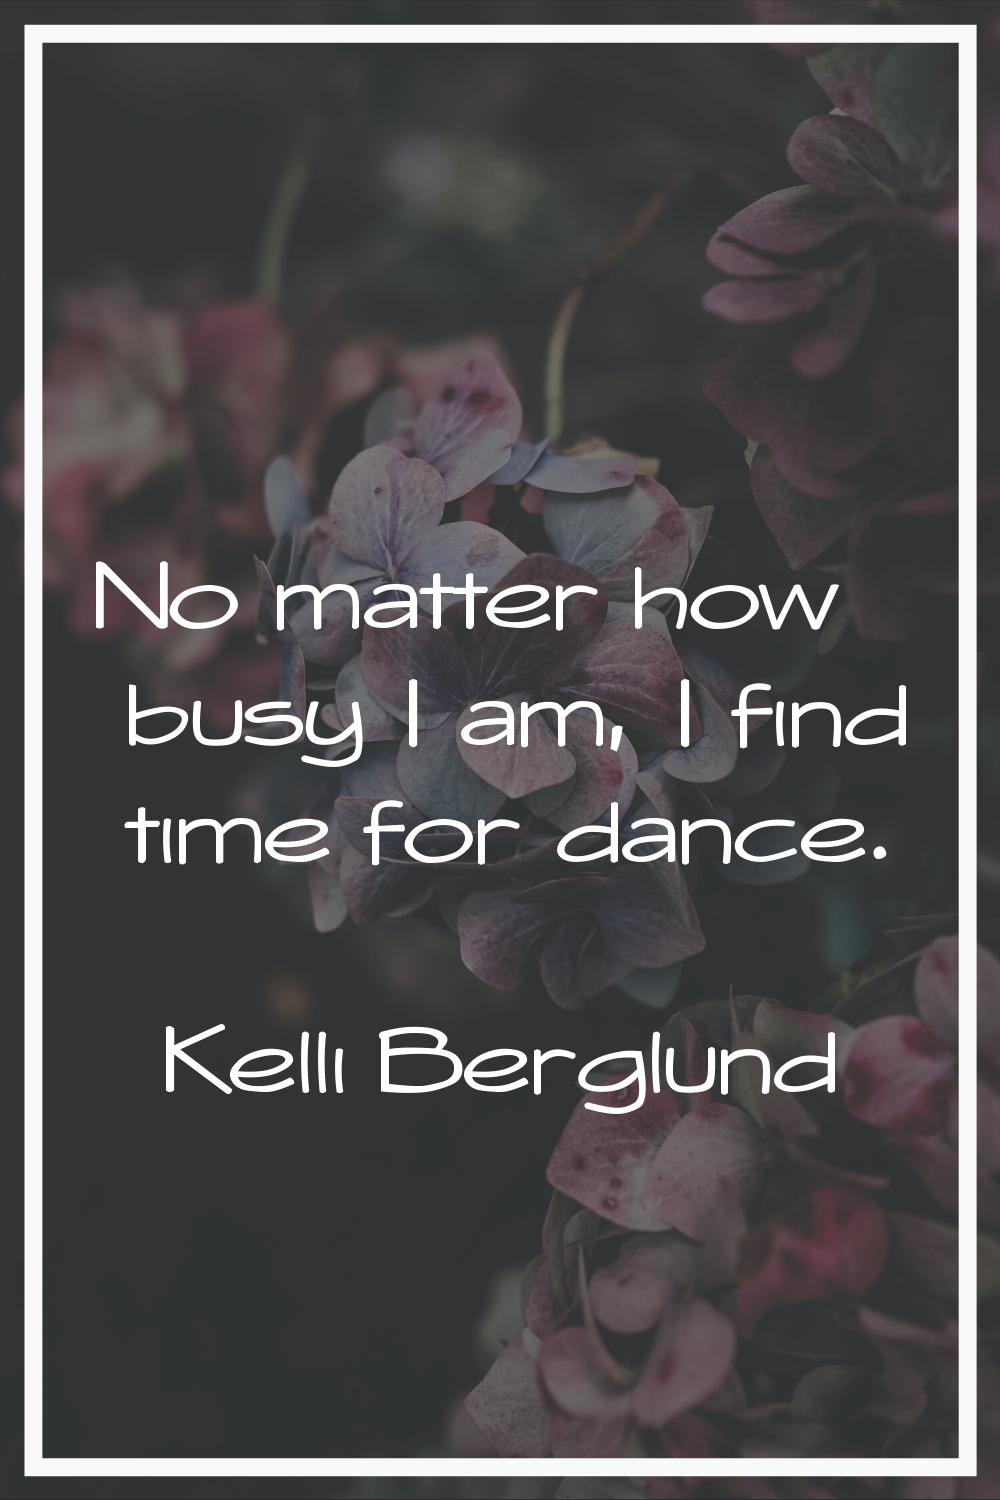 No matter how busy I am, I find time for dance.